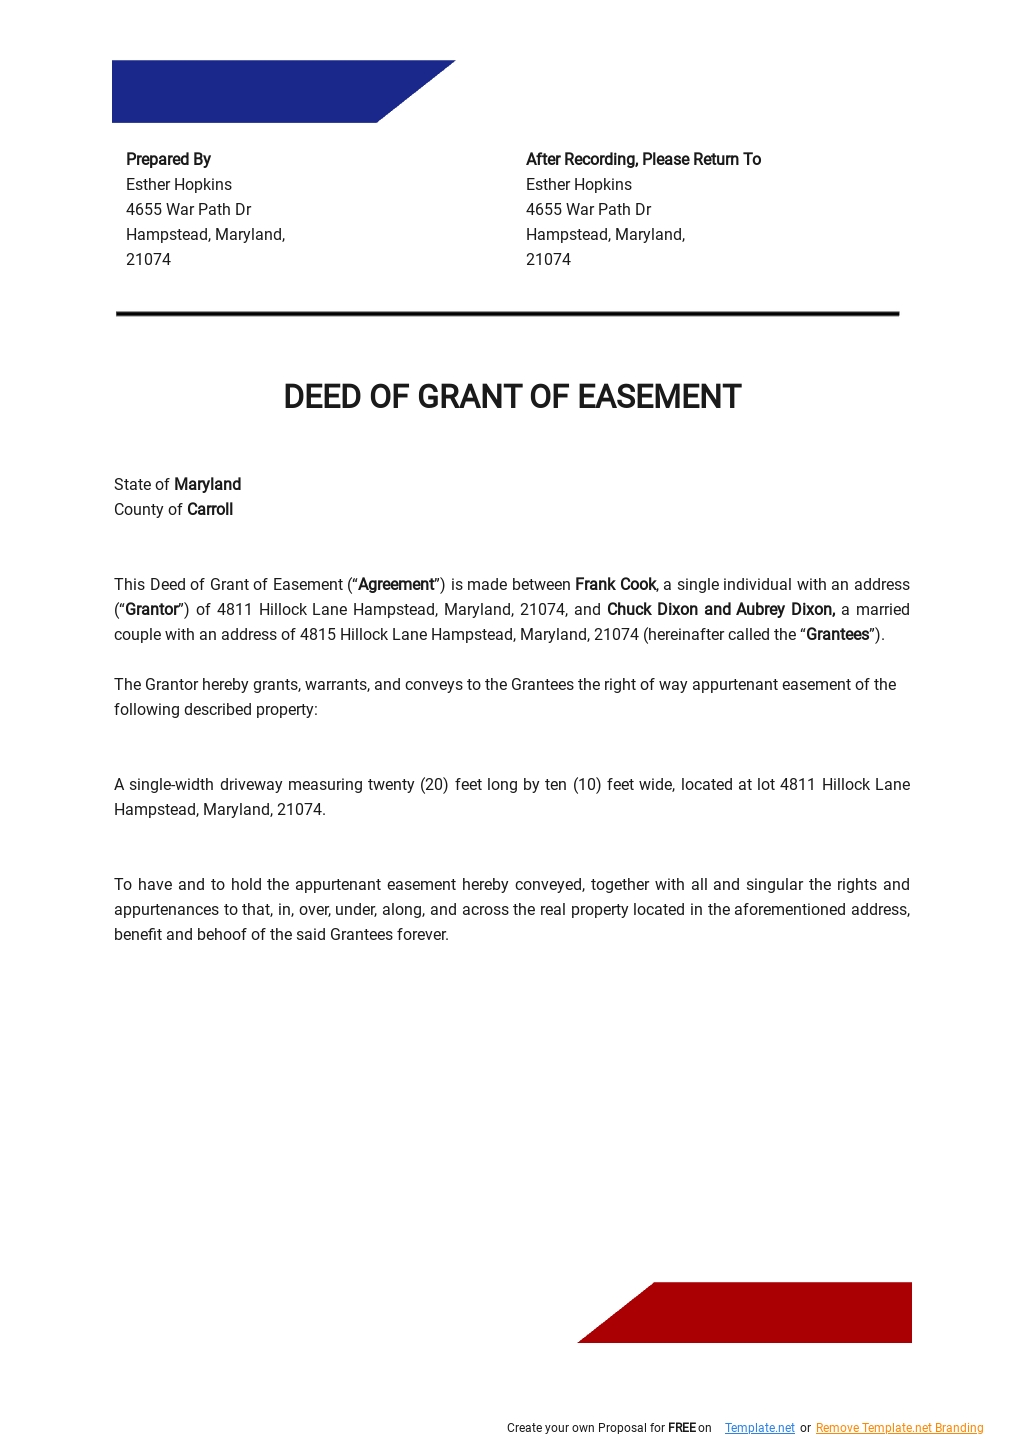 Deed of Grant of Easement Template